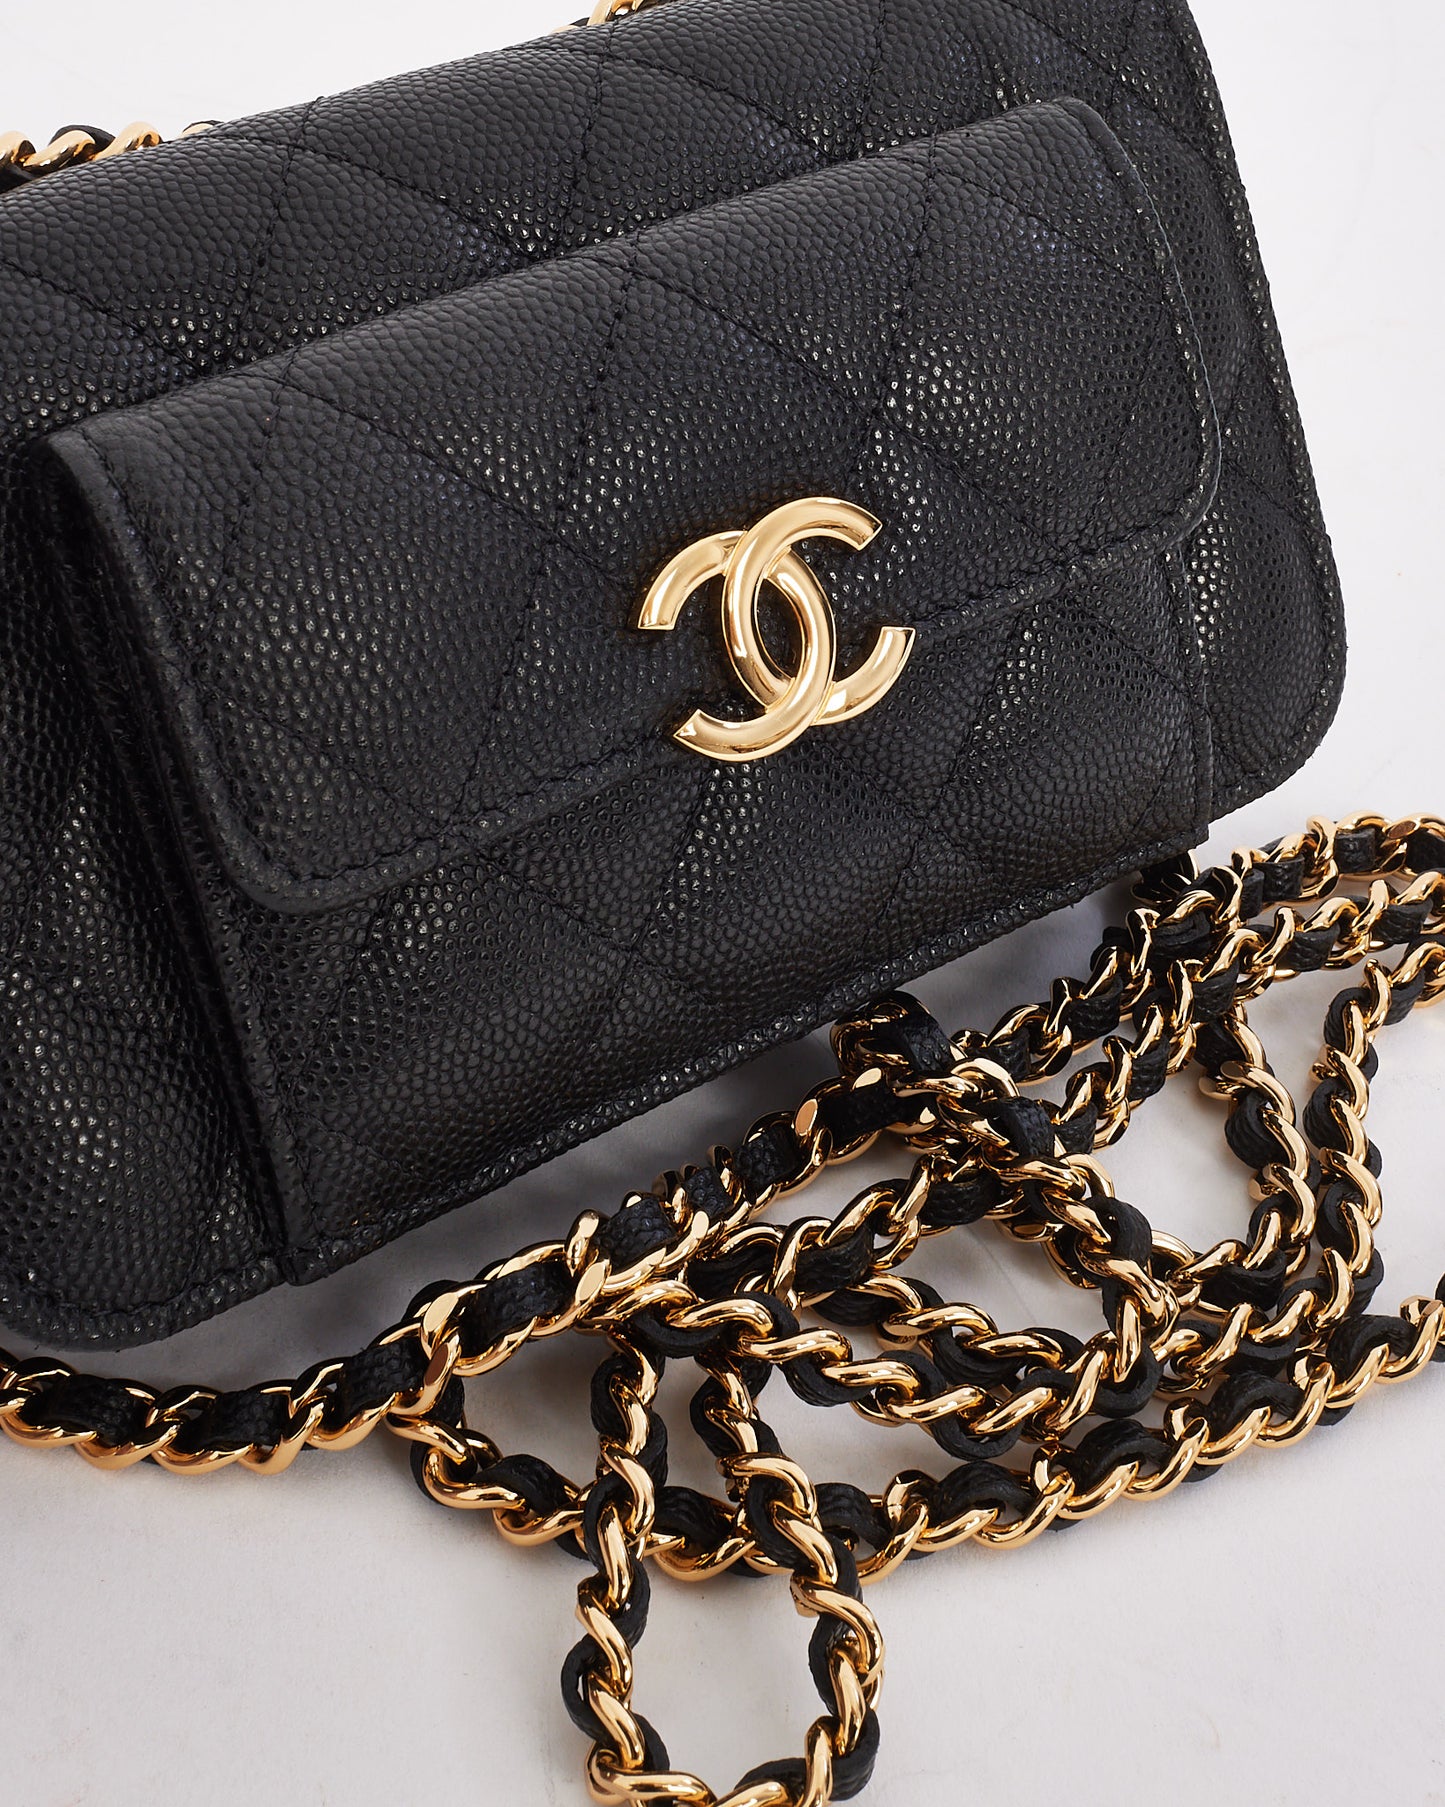 Chanel Black Caviar Leather Pocket Twin Clutch with Chain GHW